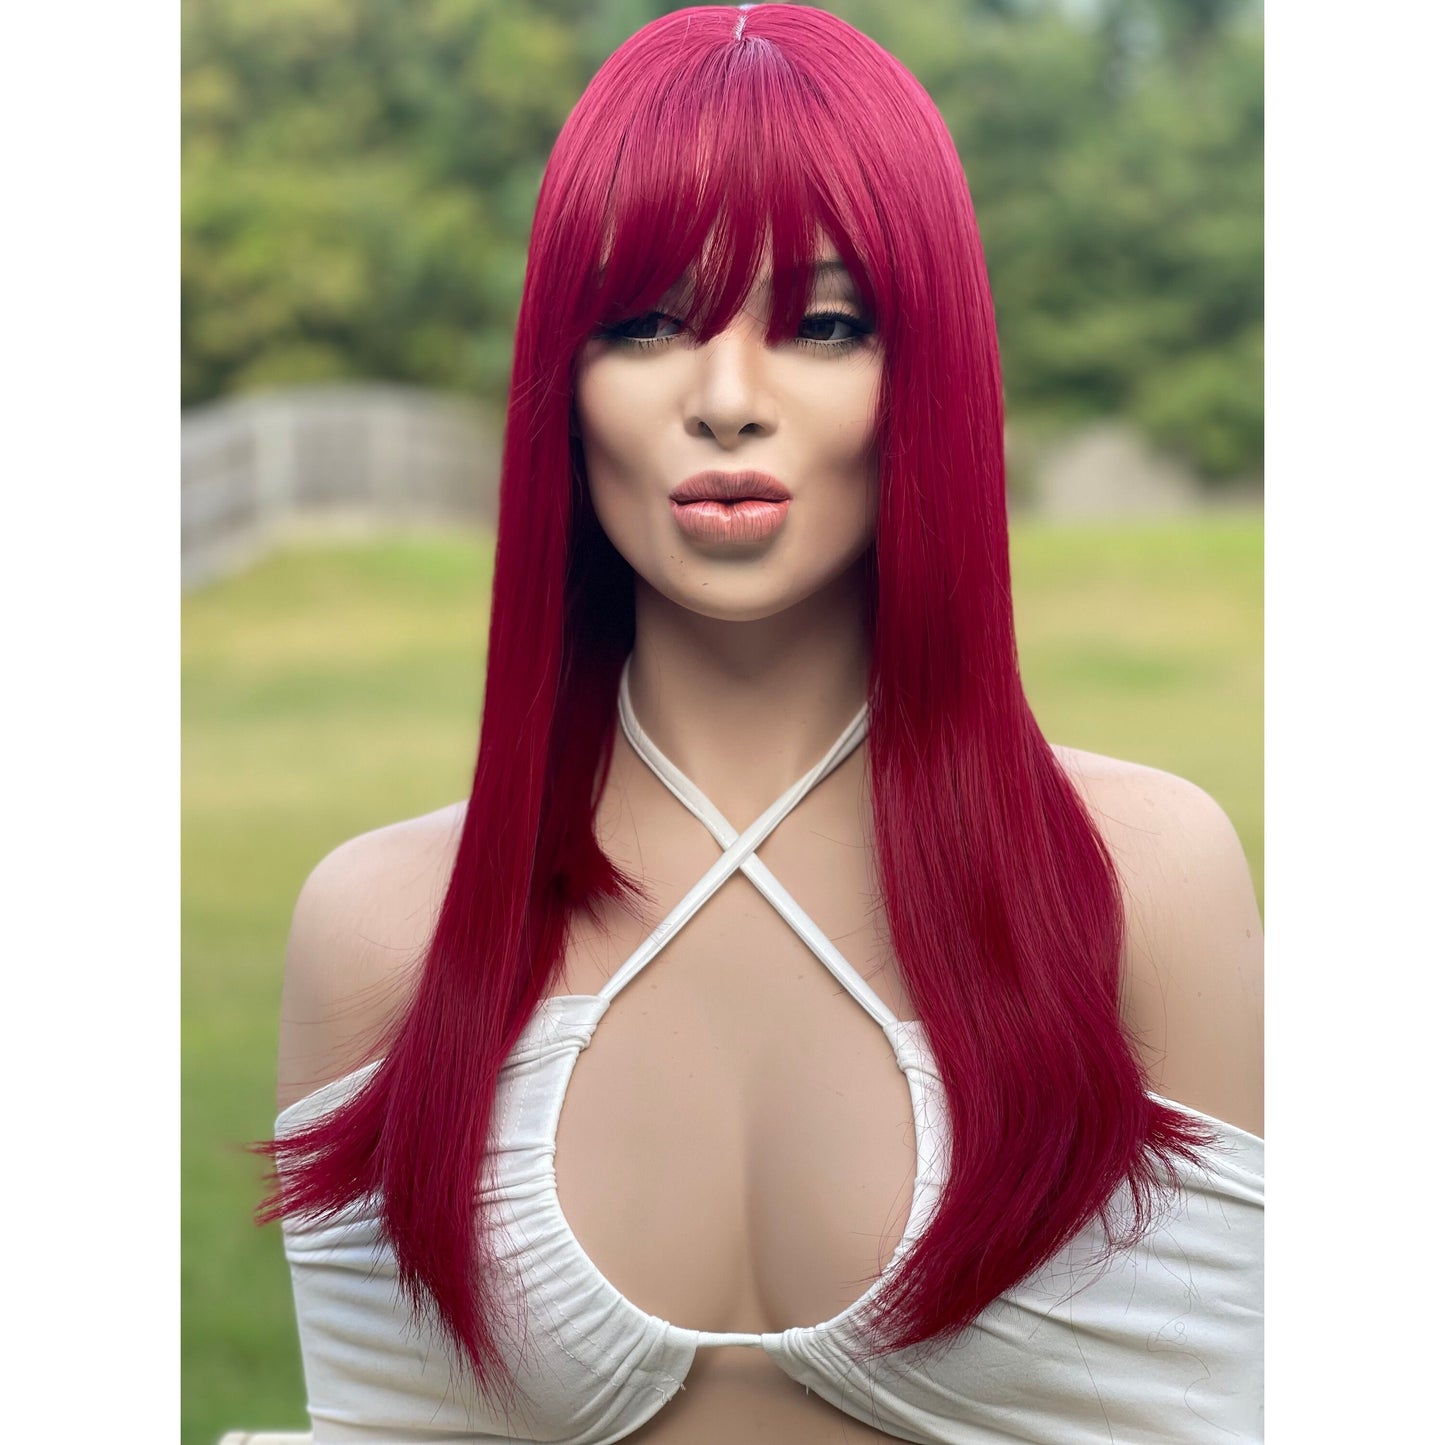 Red Long Straight Wig with Bangs, Luxury Heat Safe Human Hair Blend Wig